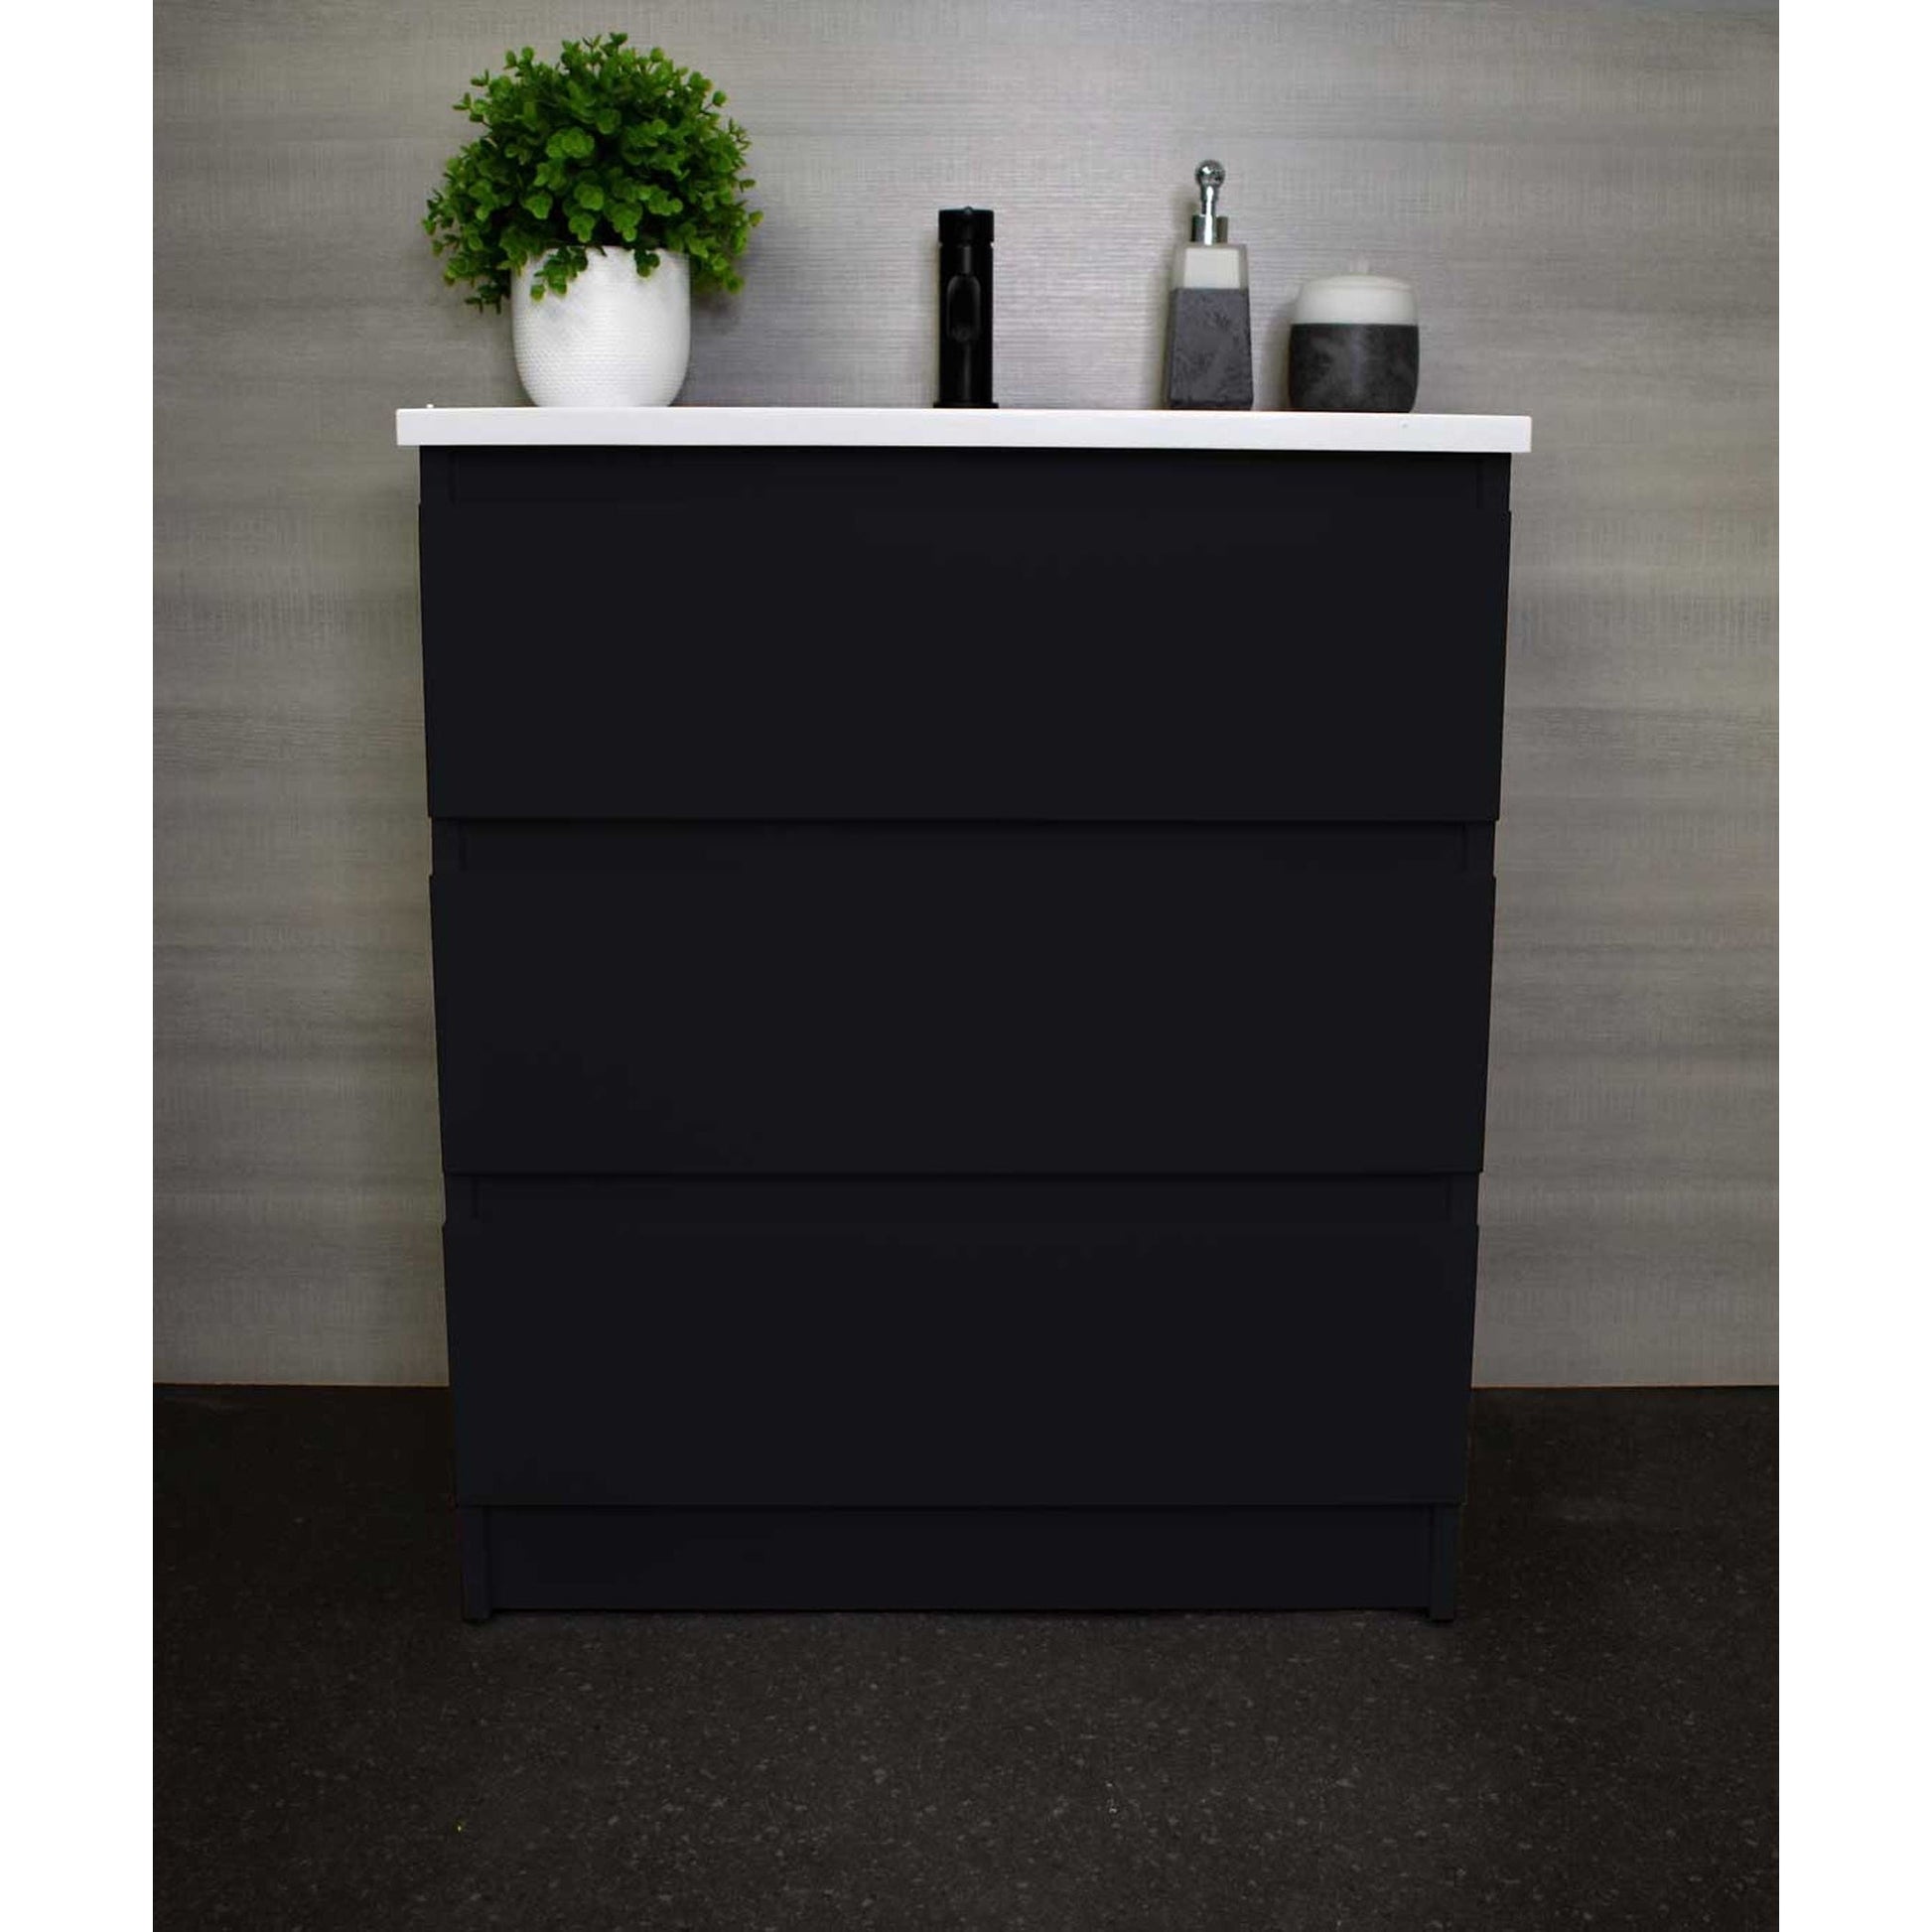 Volpa USA Pepper 24" x 20" Glossy Black Modern Freestanding Bathroom Vanity With Acrylic Top, Integrated Acrylic Sink and drawers